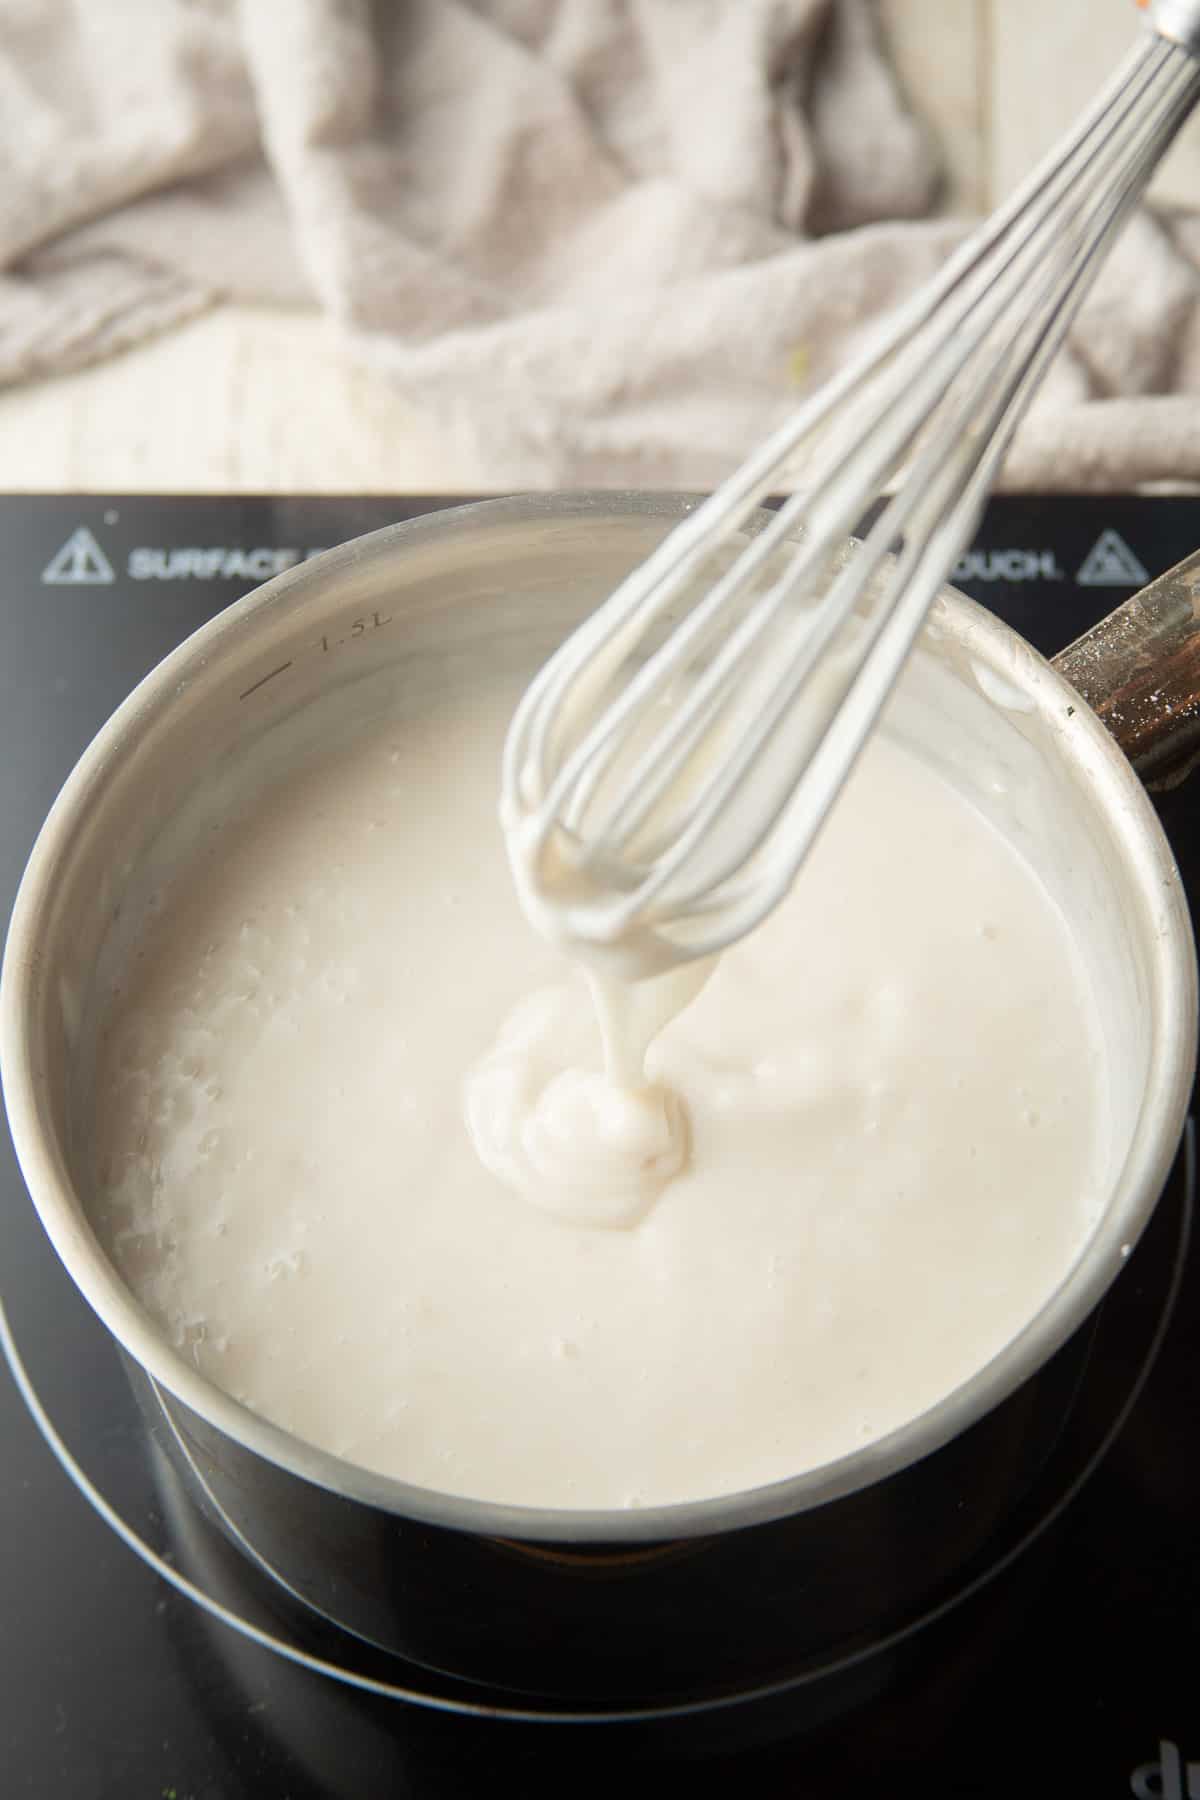 Whisk drizzling cooked coconut pudding into a saucepan.